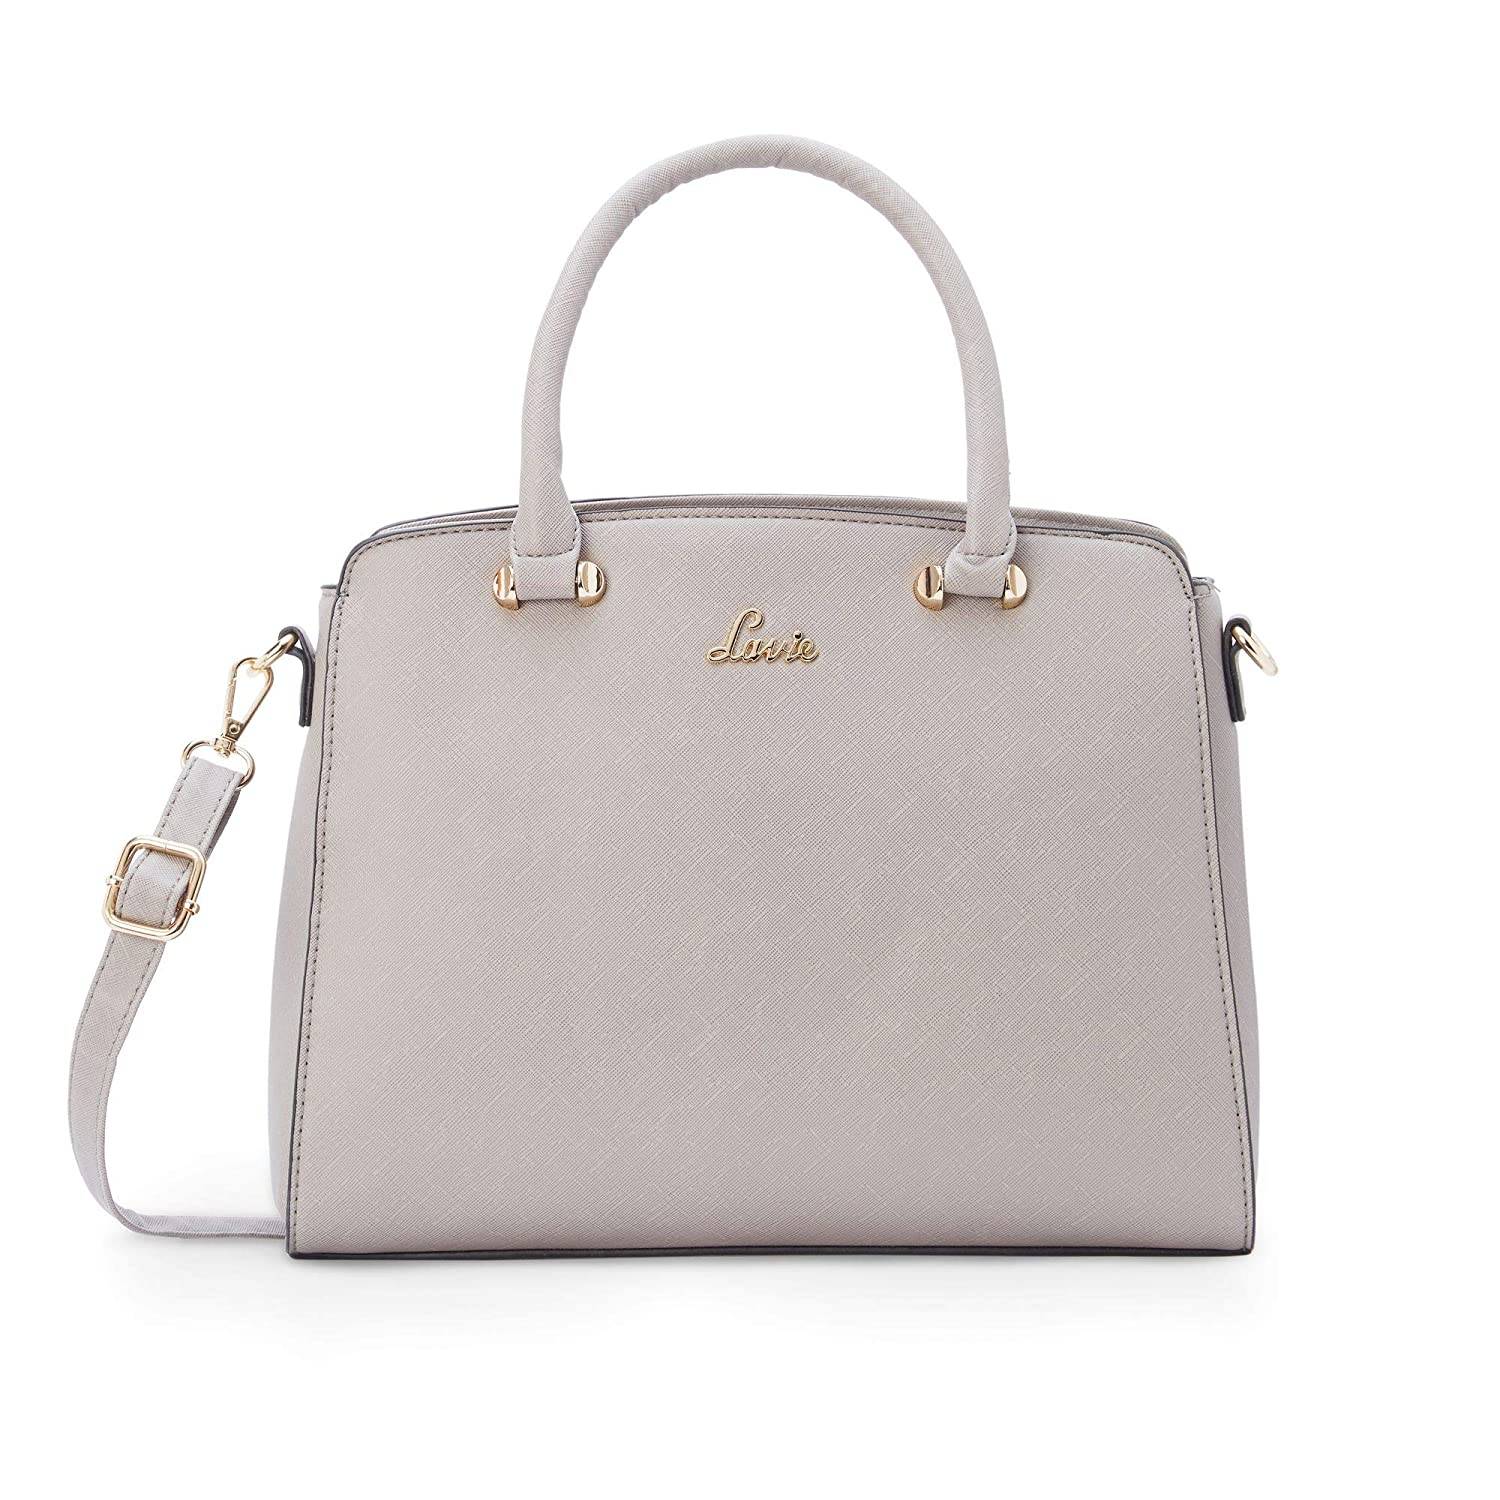 Made from high quality and soft material, this handbag features a  well-stitched inner lining for easy accessibility and storage. Raily  features glossy Croc texture & dual round handles with adjustable and  detachable